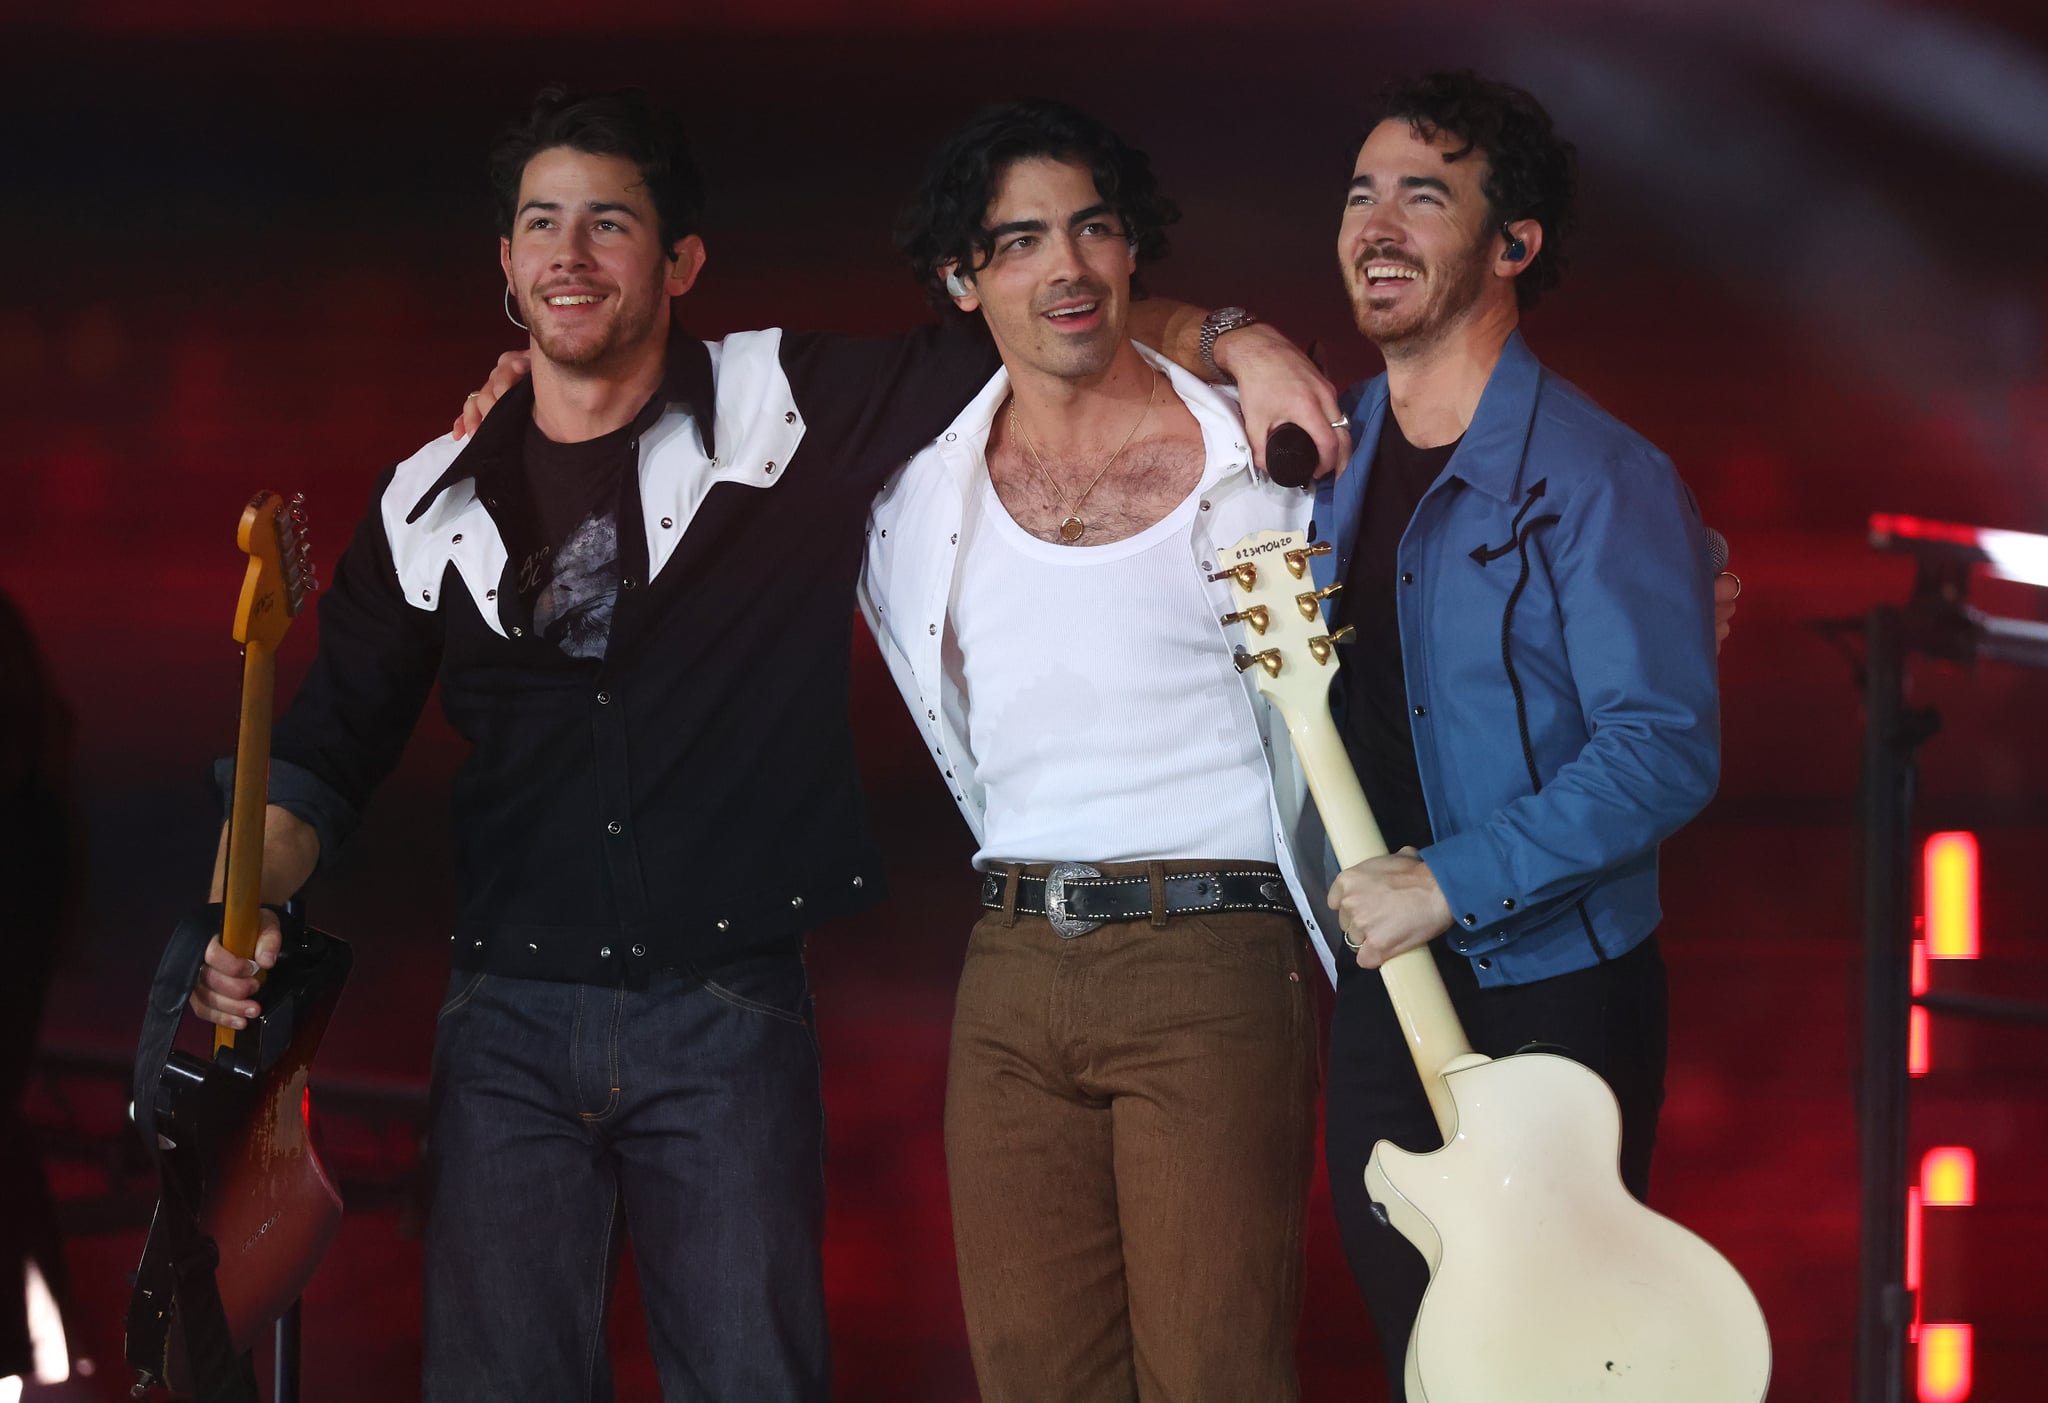 ARLINGTON, TEXAS - NOVEMBER 24: Nick Jonas, Joe Jonas and Kevin Jonas of the Jonas Brothers perform at the halftime show during the game between the Dallas Cowboys and the New York Giants at AT&T Stadium on November 24, 2022 in Arlington, Texas.  (Photo by Richard Rodriguez / Getty Images)